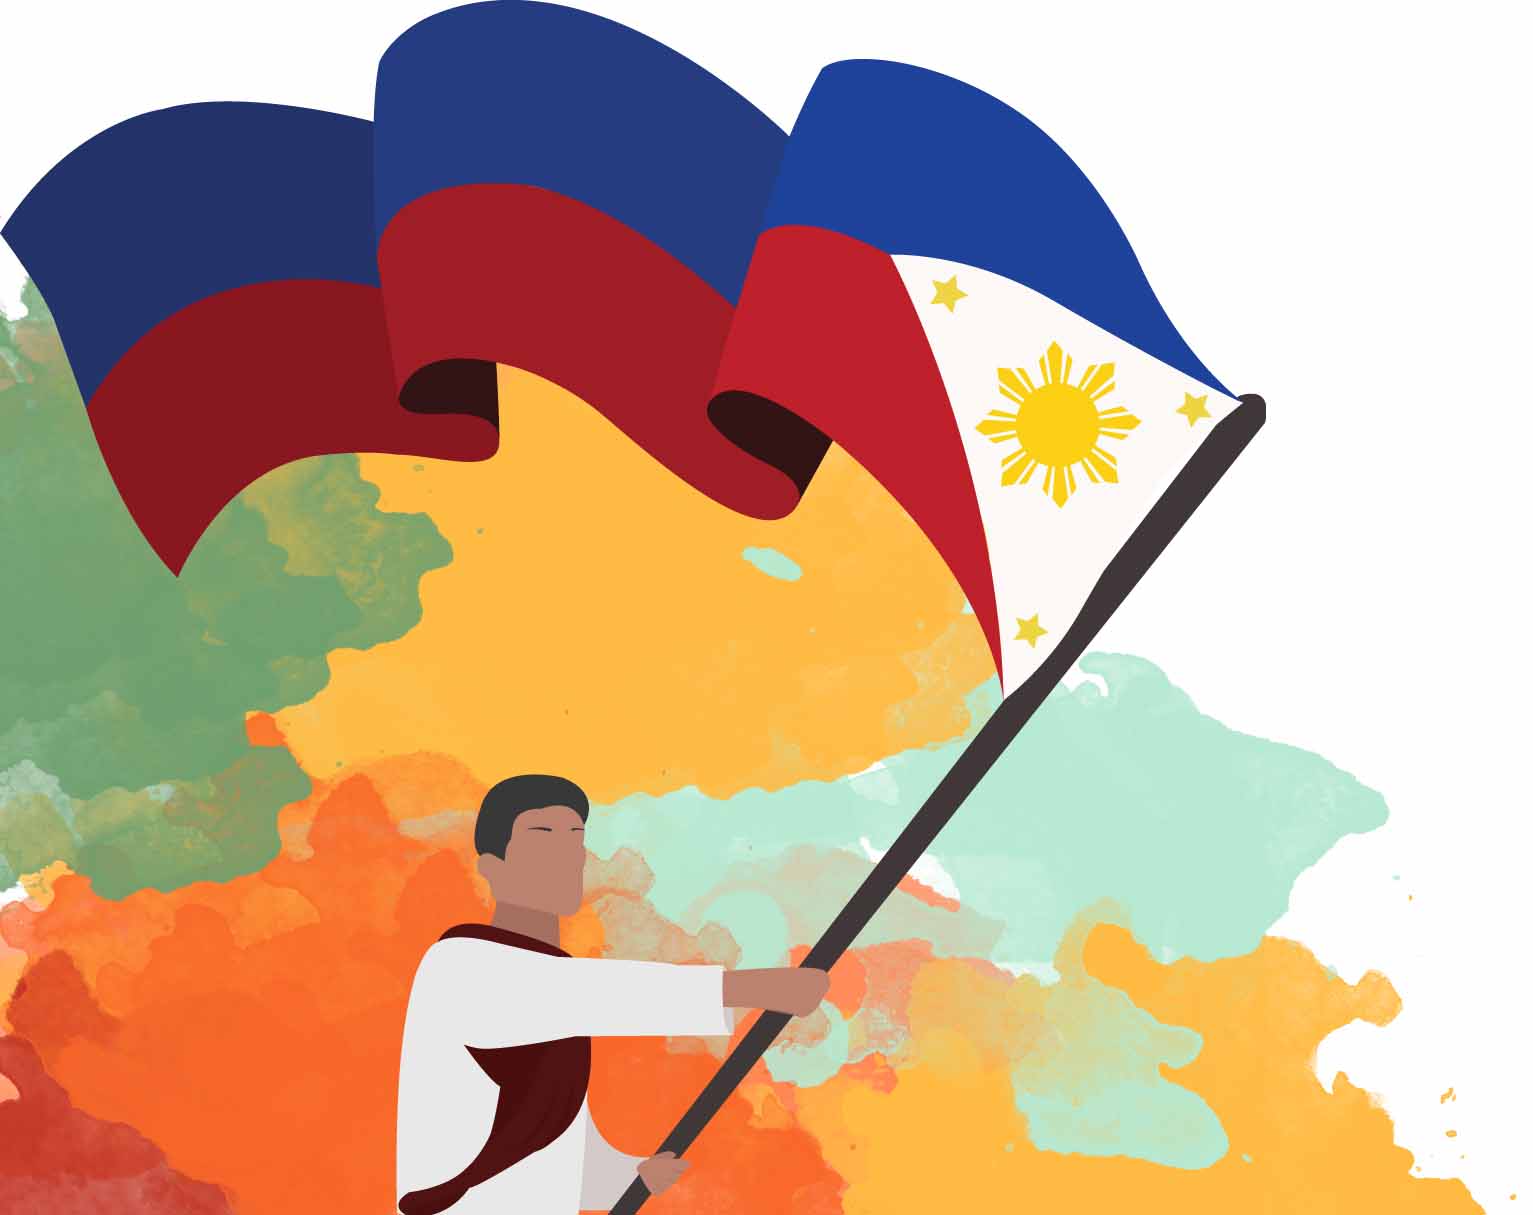 philippine independence day reflection essay